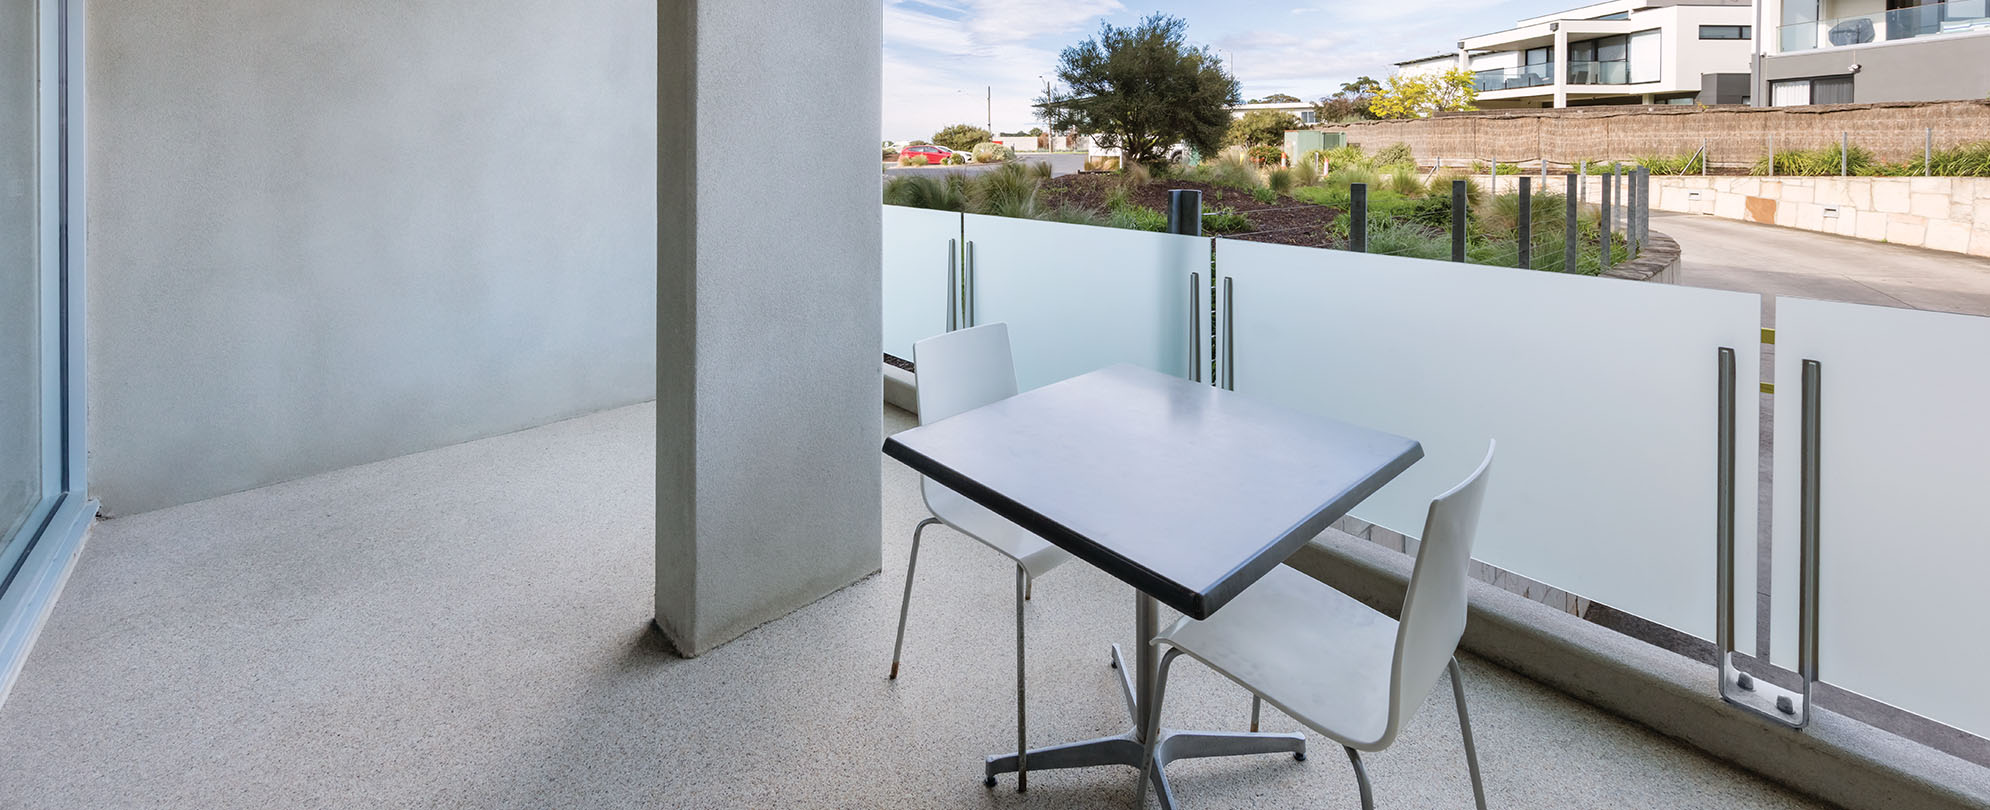 A balcony with a table in chairs from an accessible suite at Club Wyndham Torquay.